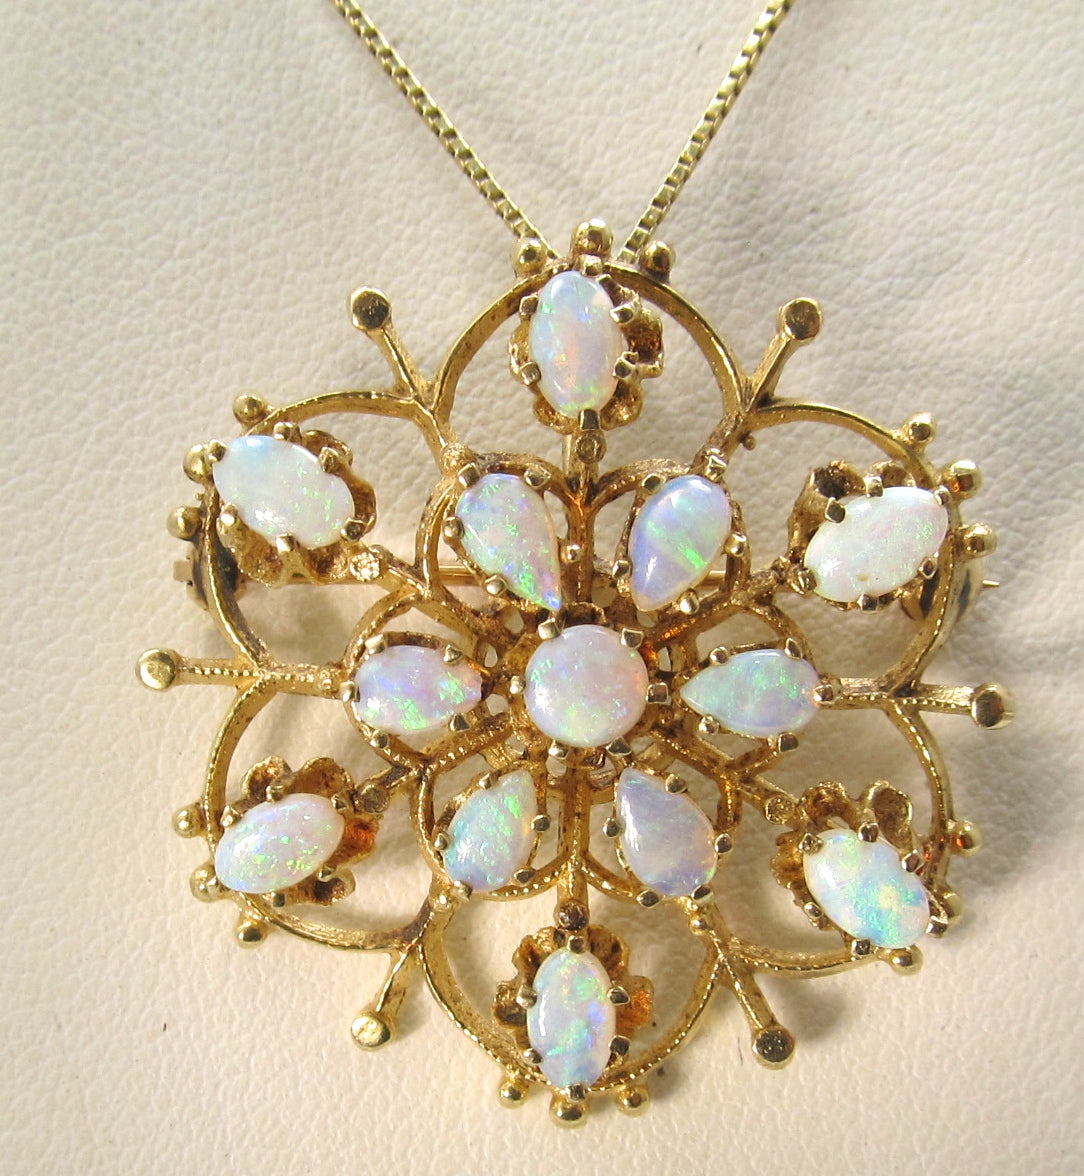 Vintage 14k yellow gold necklace with opals